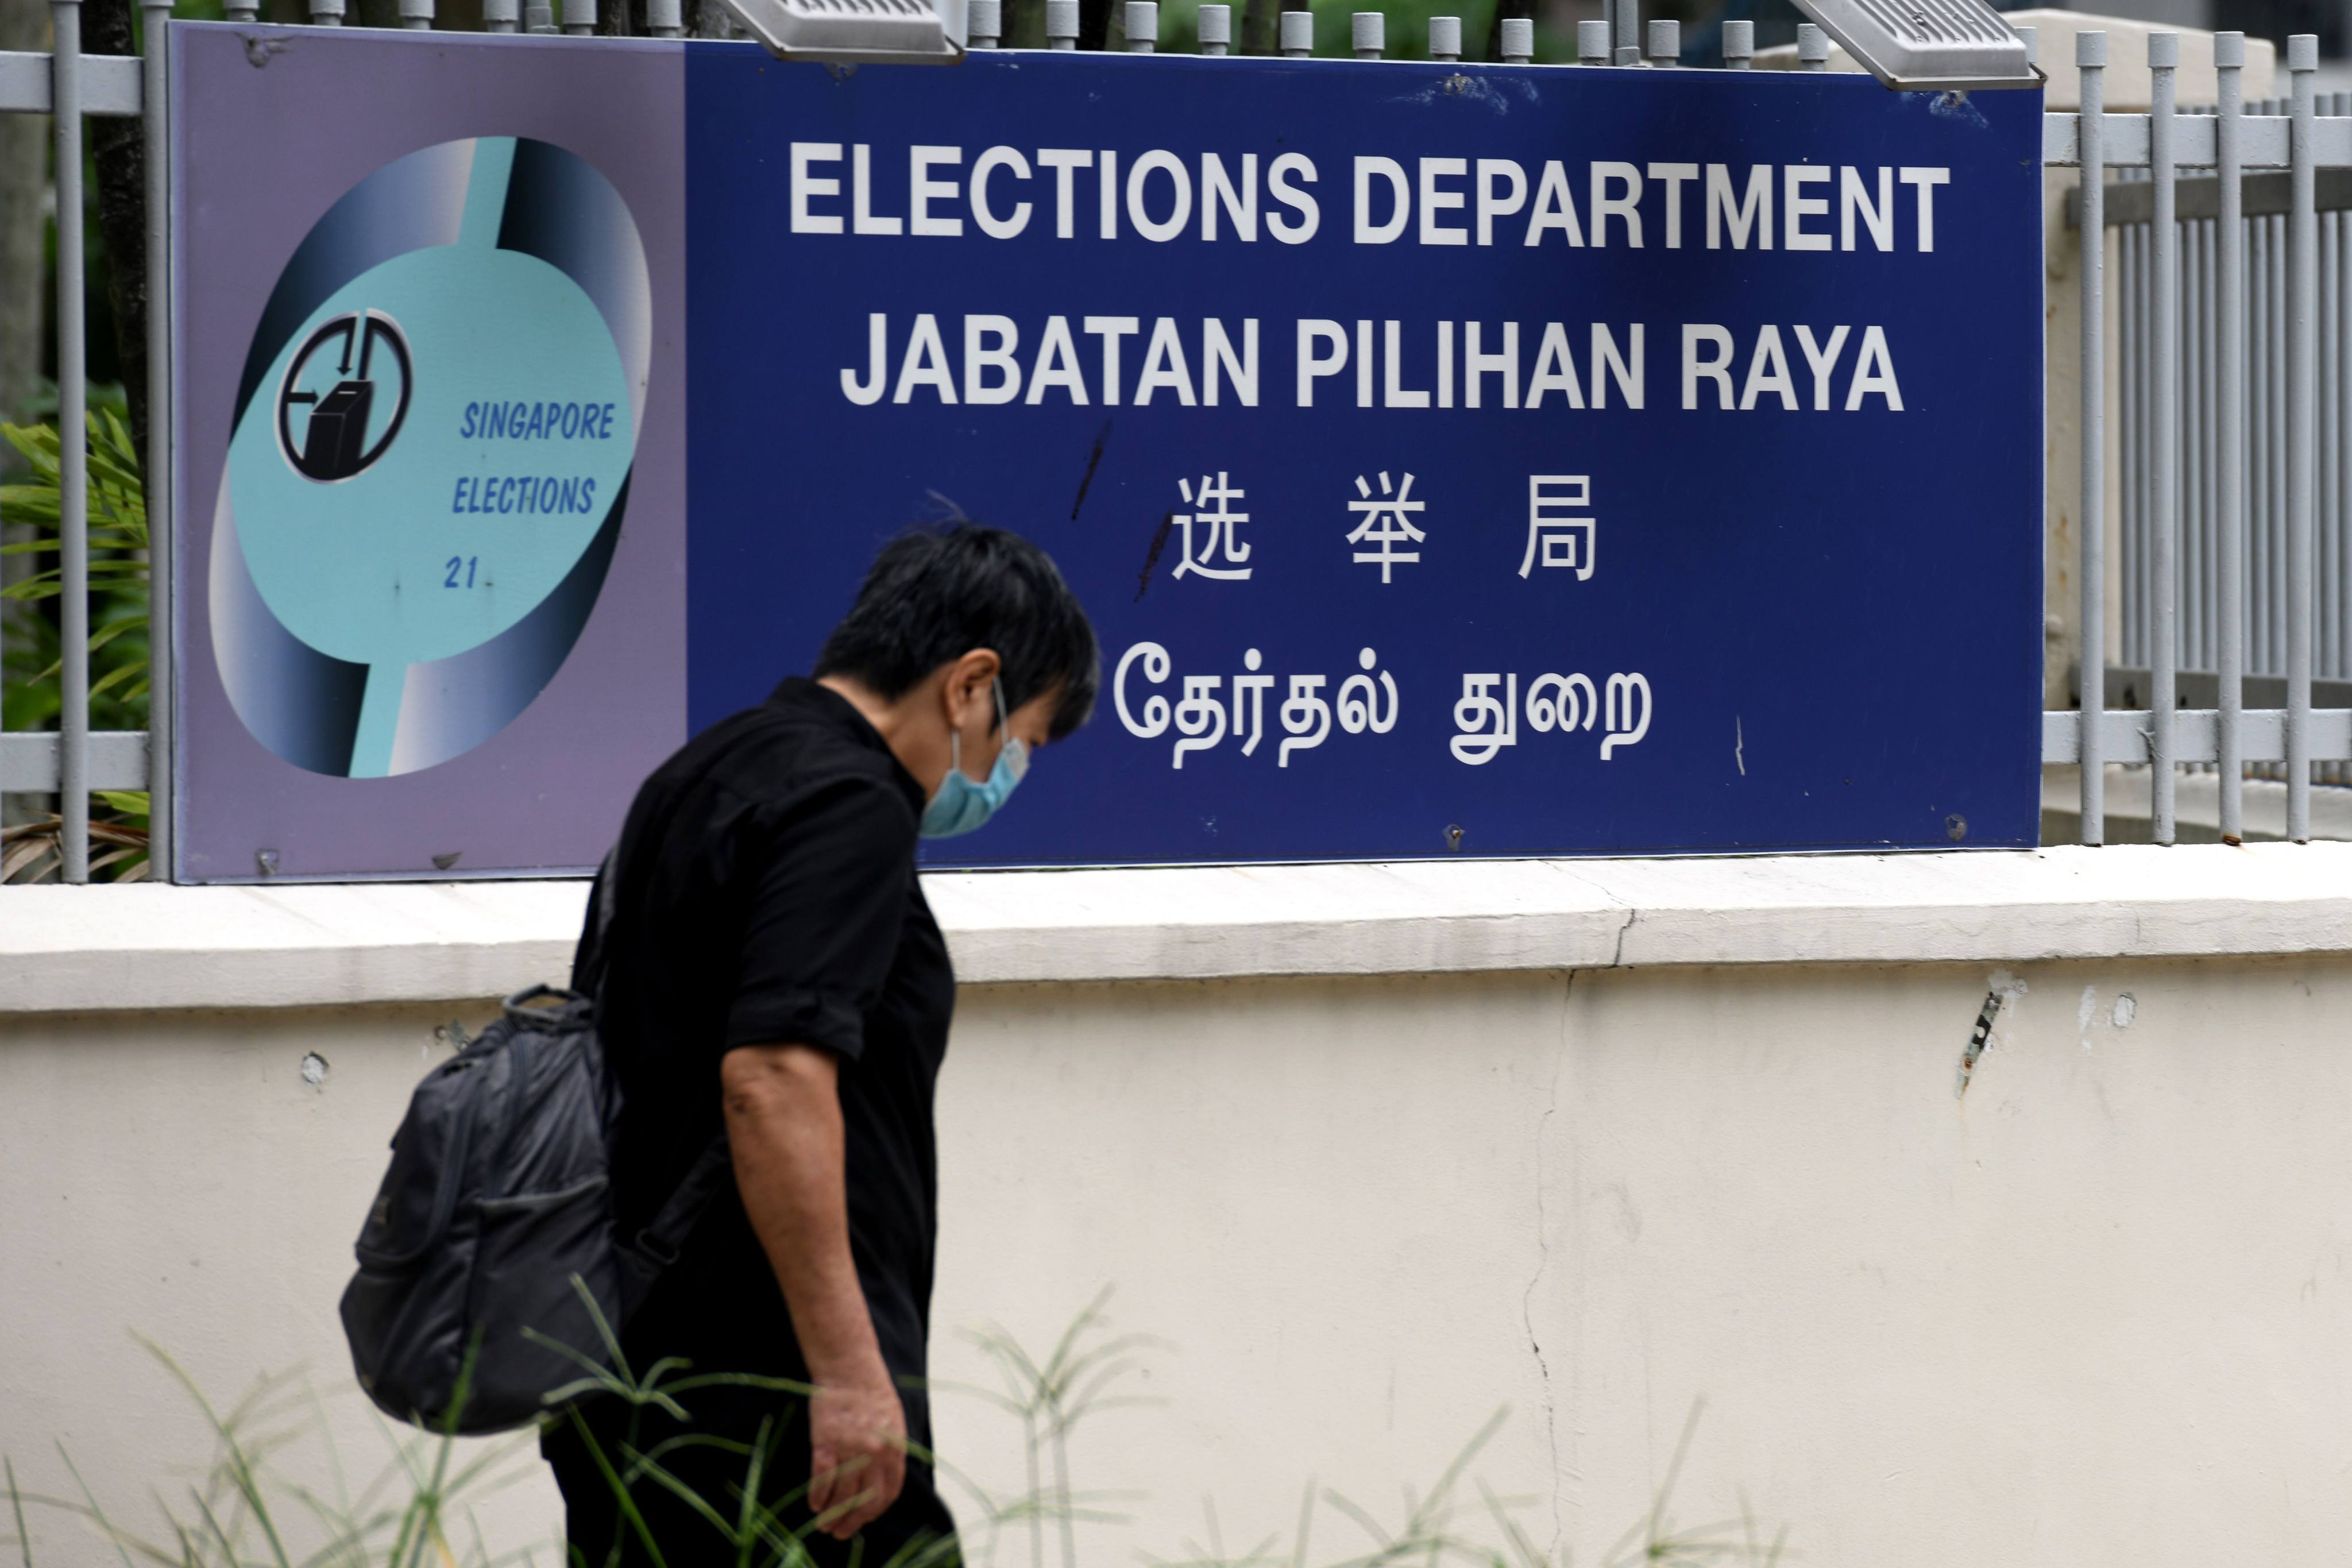 The Elections Department centre in Singapore. Photo: AFP